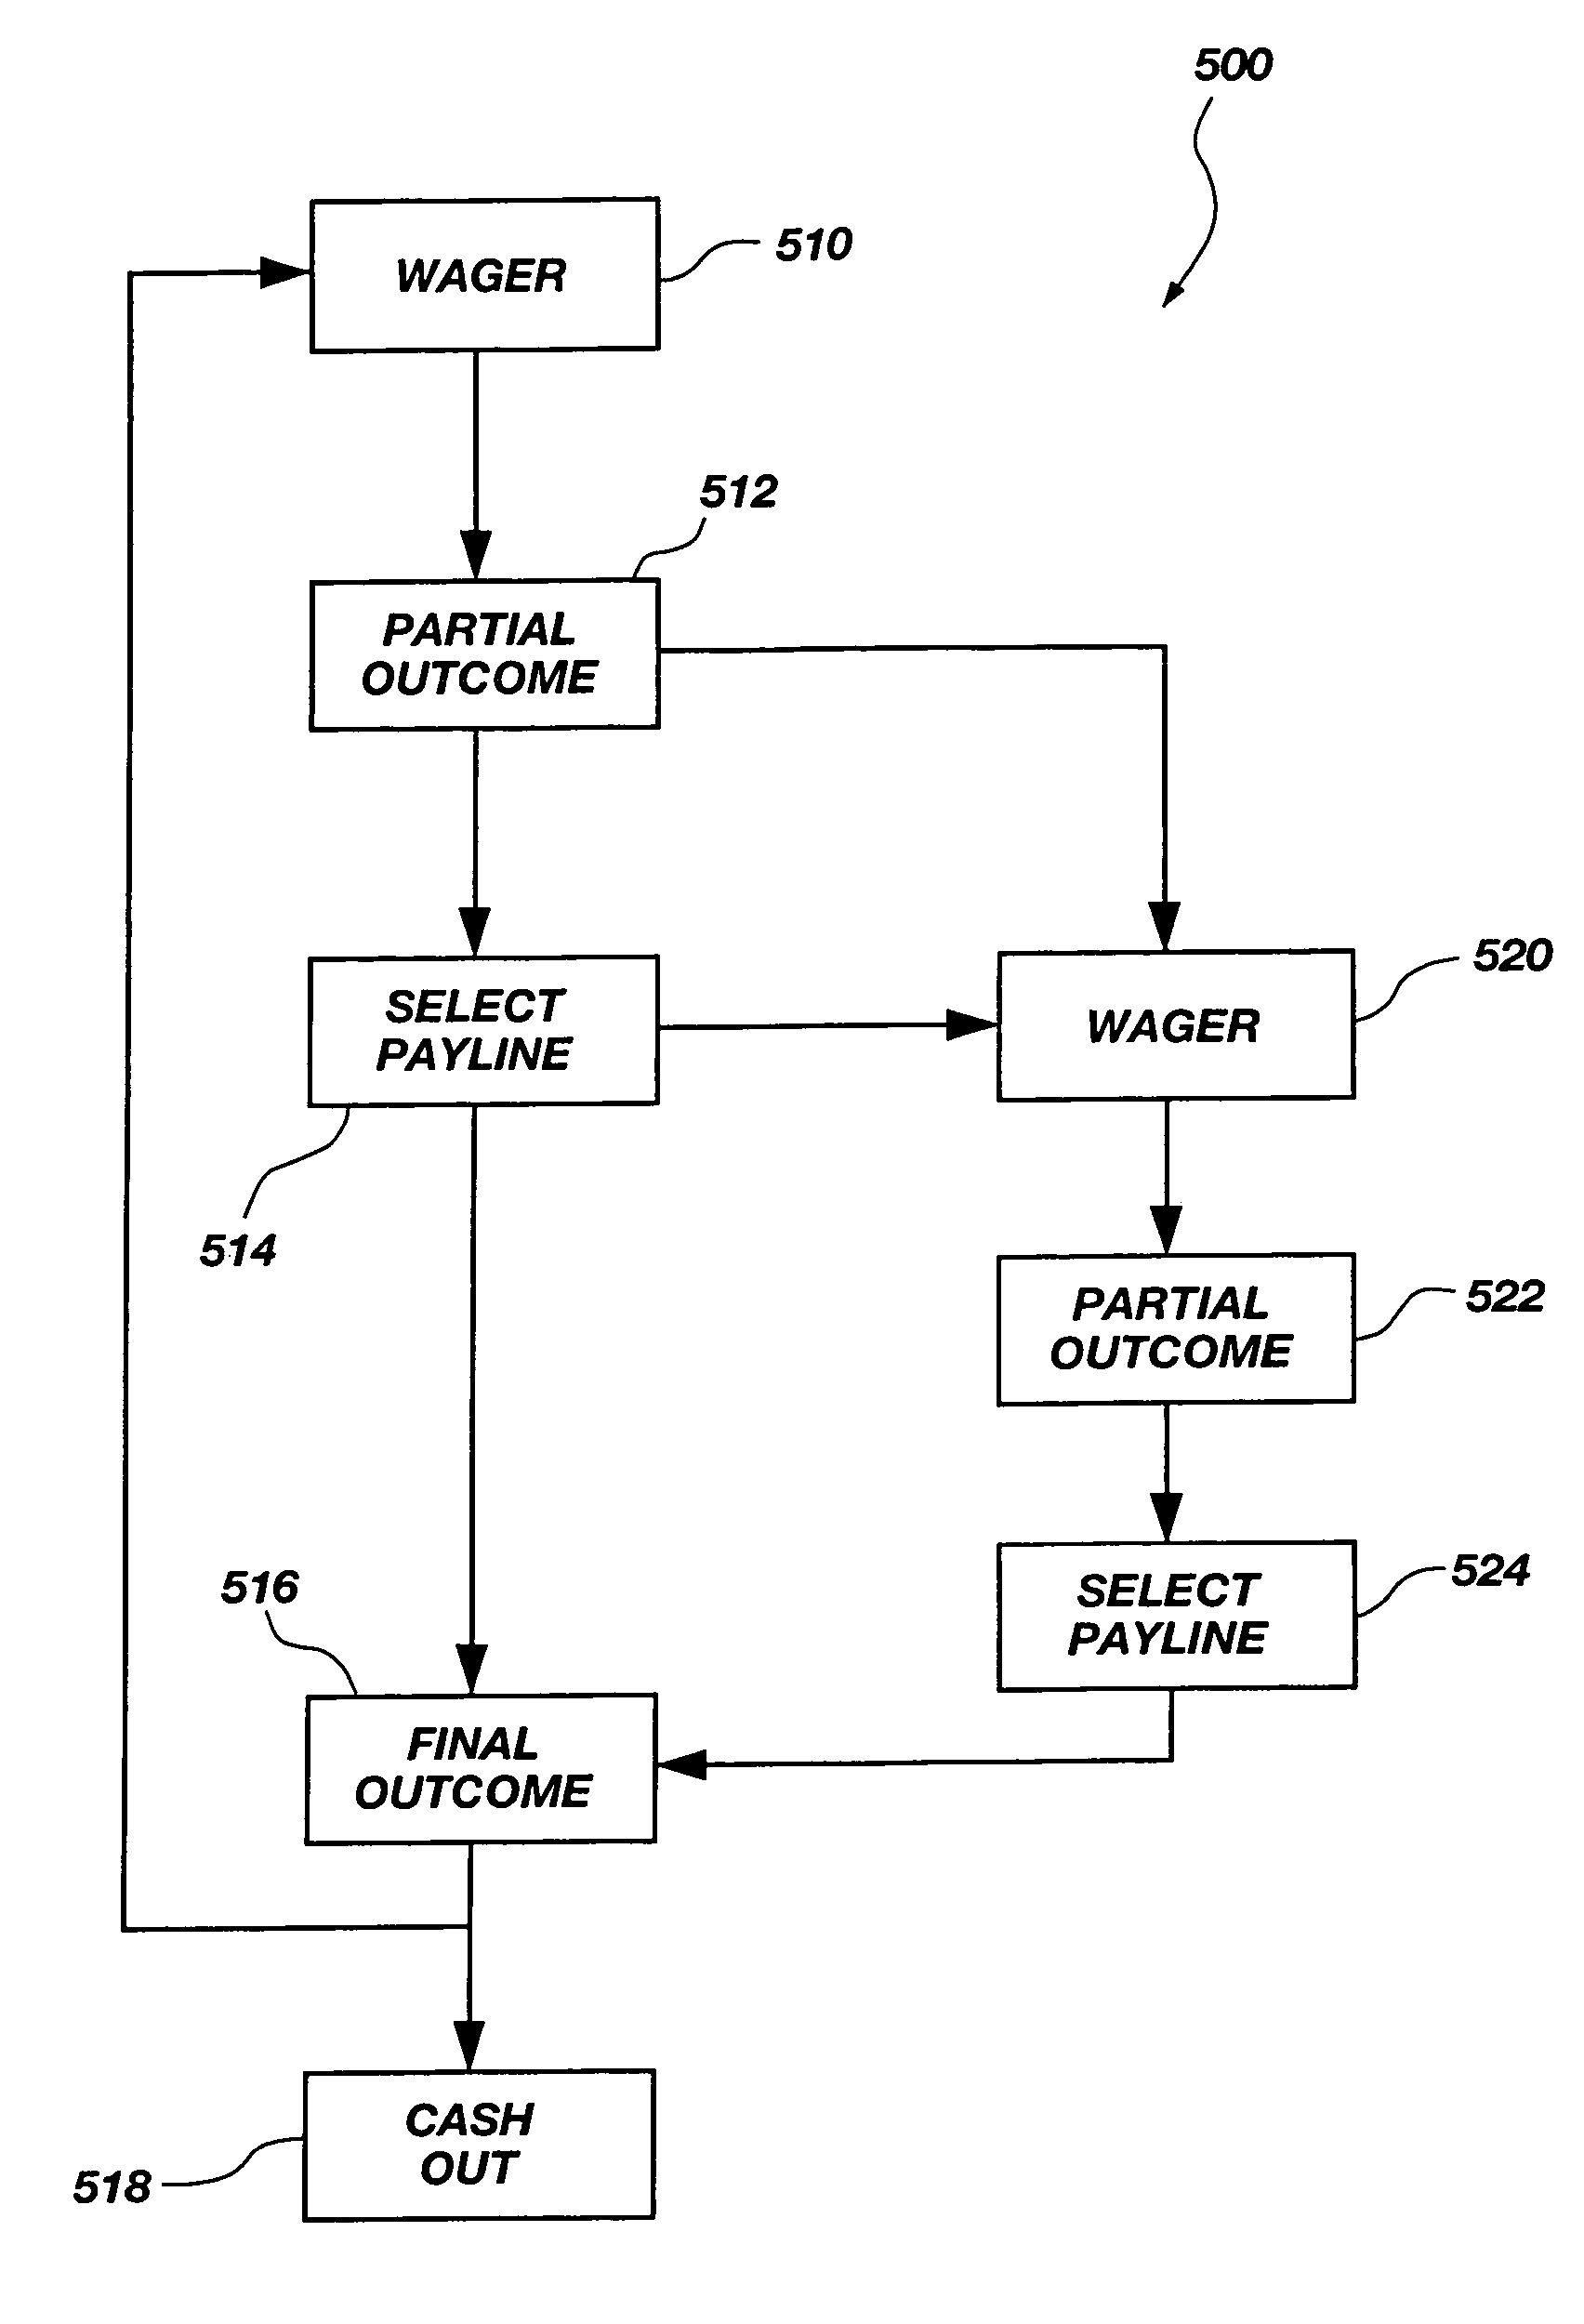 Method and apparatus for selecting pay lines based on a partial outcome of a slots game